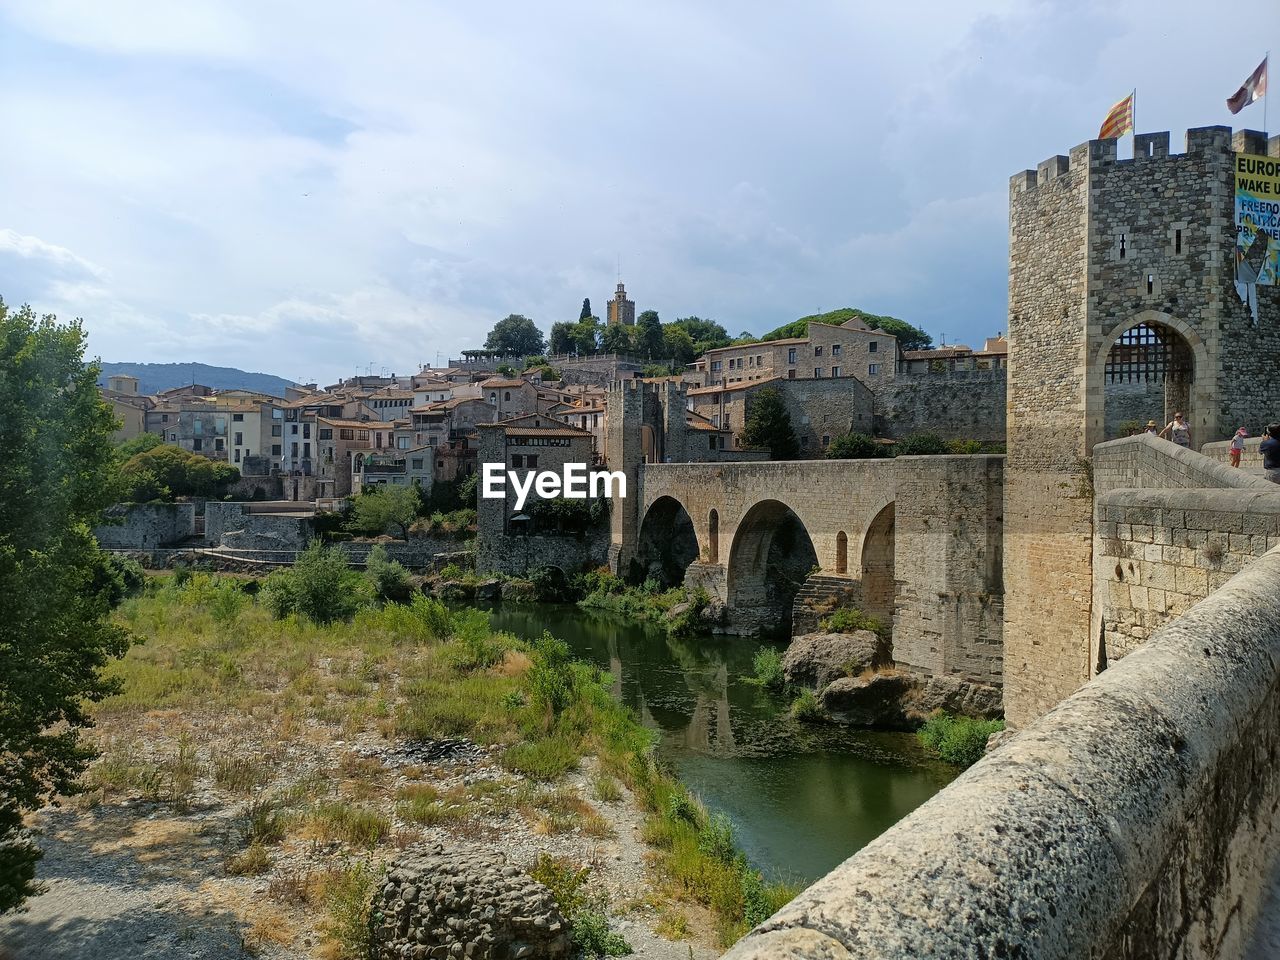 Beautiful side view off a city in spain with bridge and tower